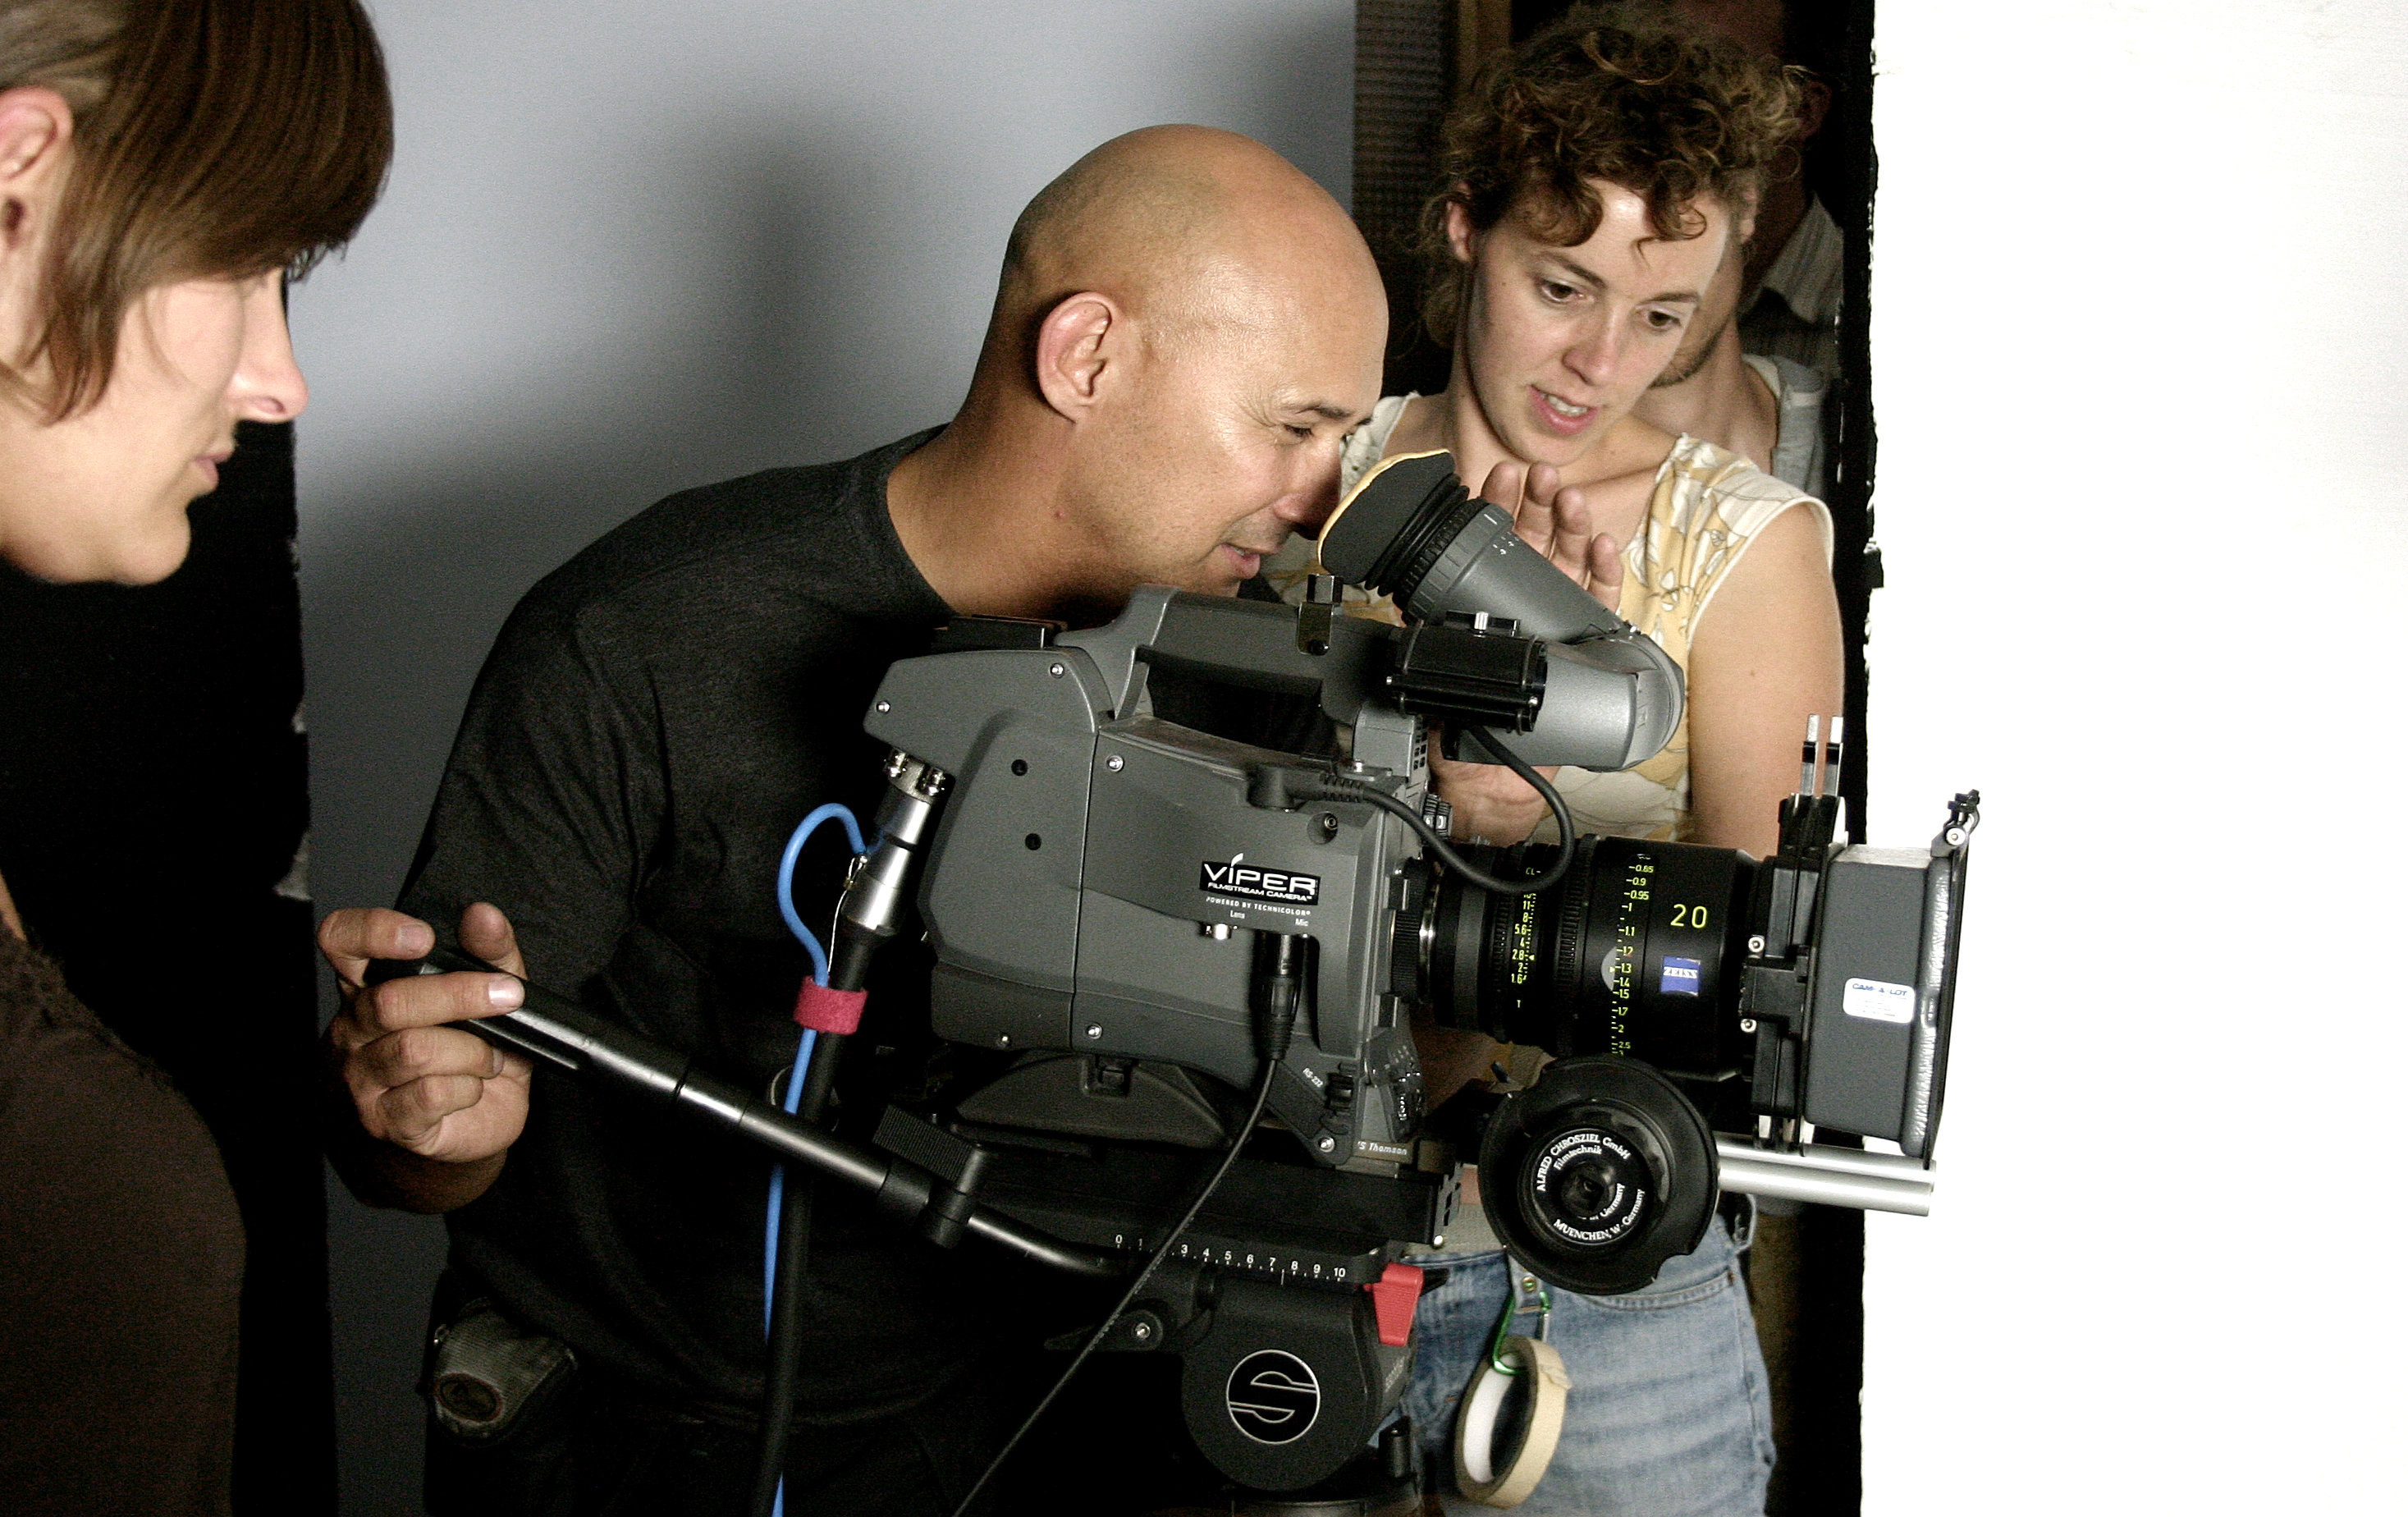 Robert M. Berger, shooting Uncompressed with Viper HD camera voor Short fiction movie,,Morgana,,